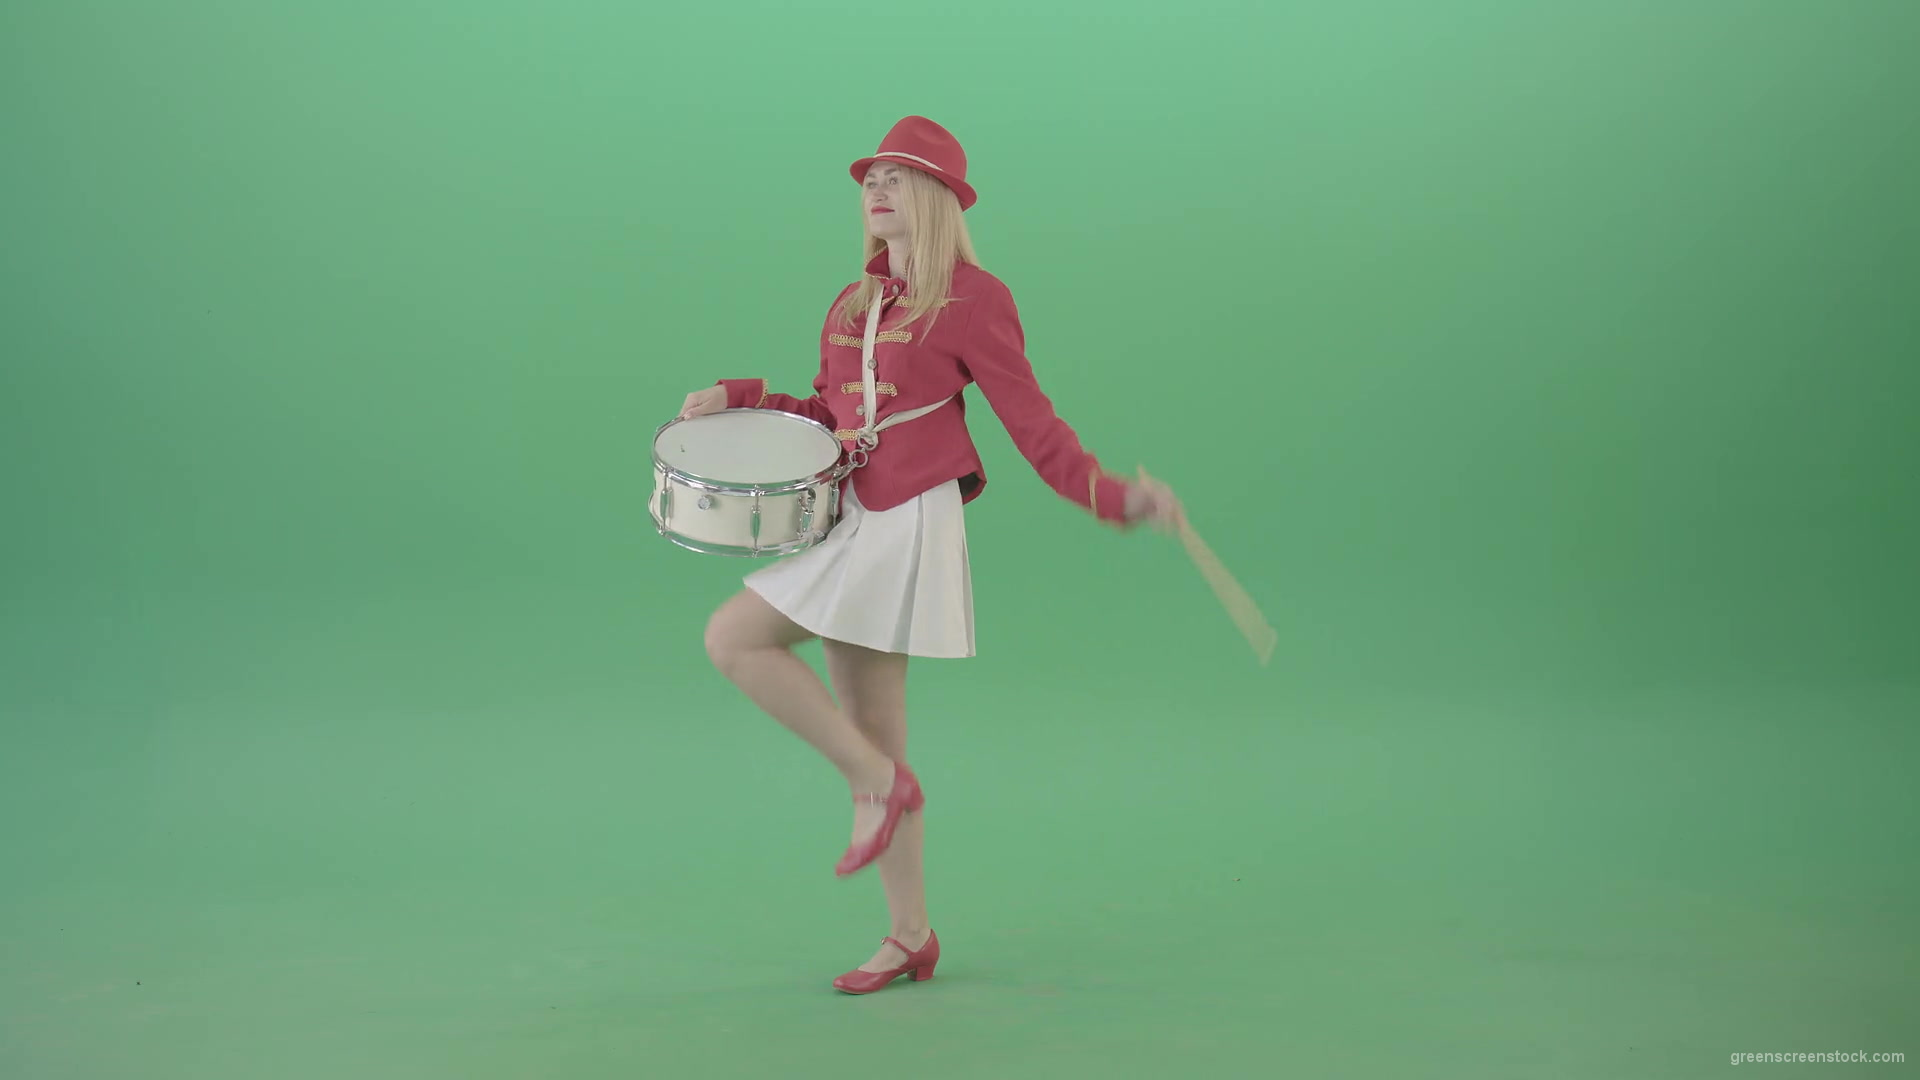 Red-Costume-Girl-in-Side-view-marching-on-green-screen-and-playing-snare-drum-4K-Video-Footage-1920_008 Green Screen Stock